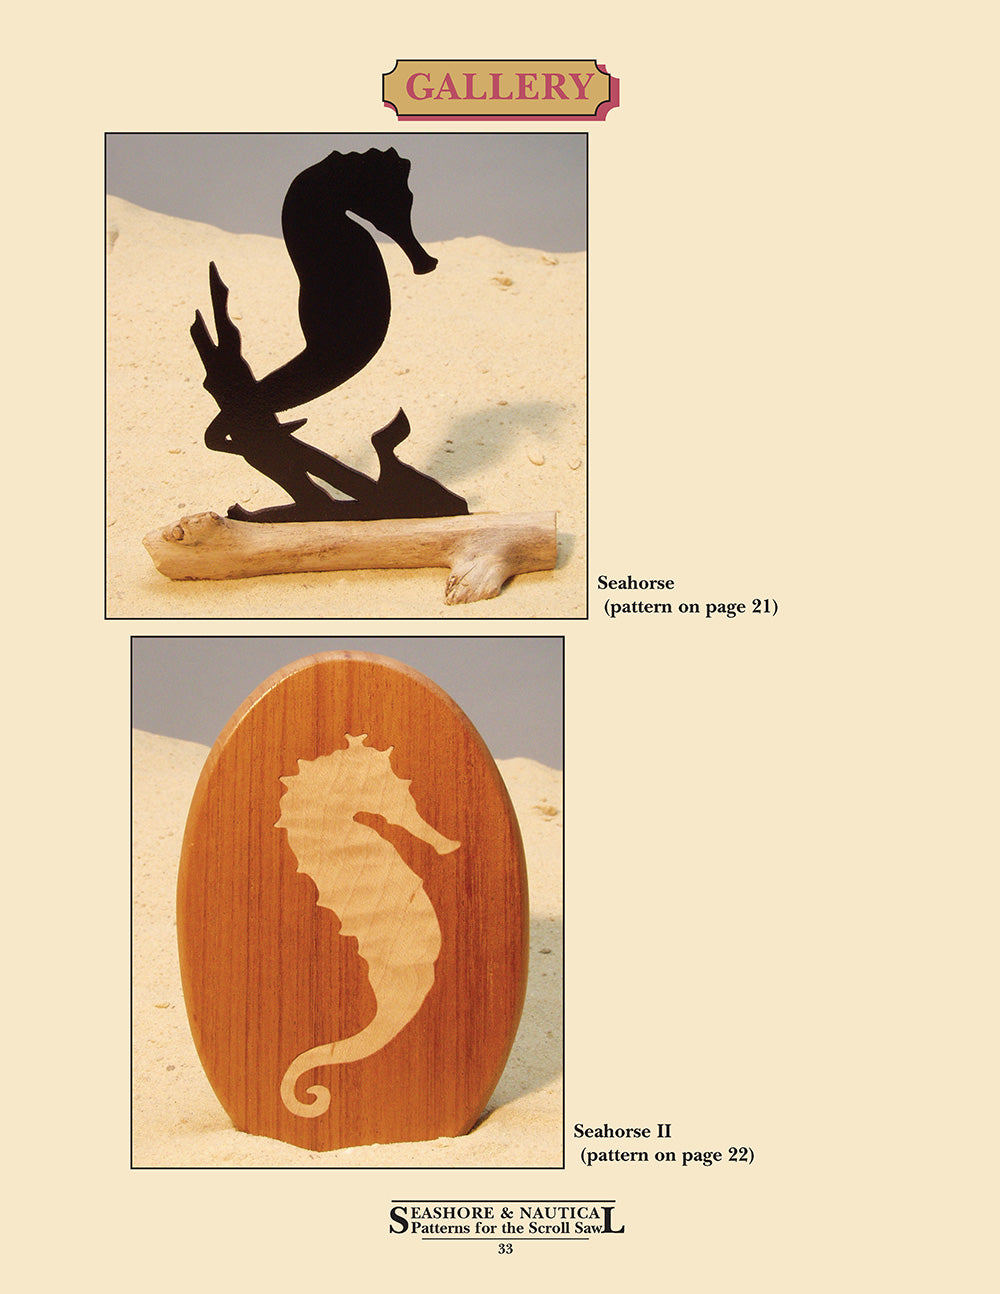 Seashore and Nautical Patterns for the Scroll Saw